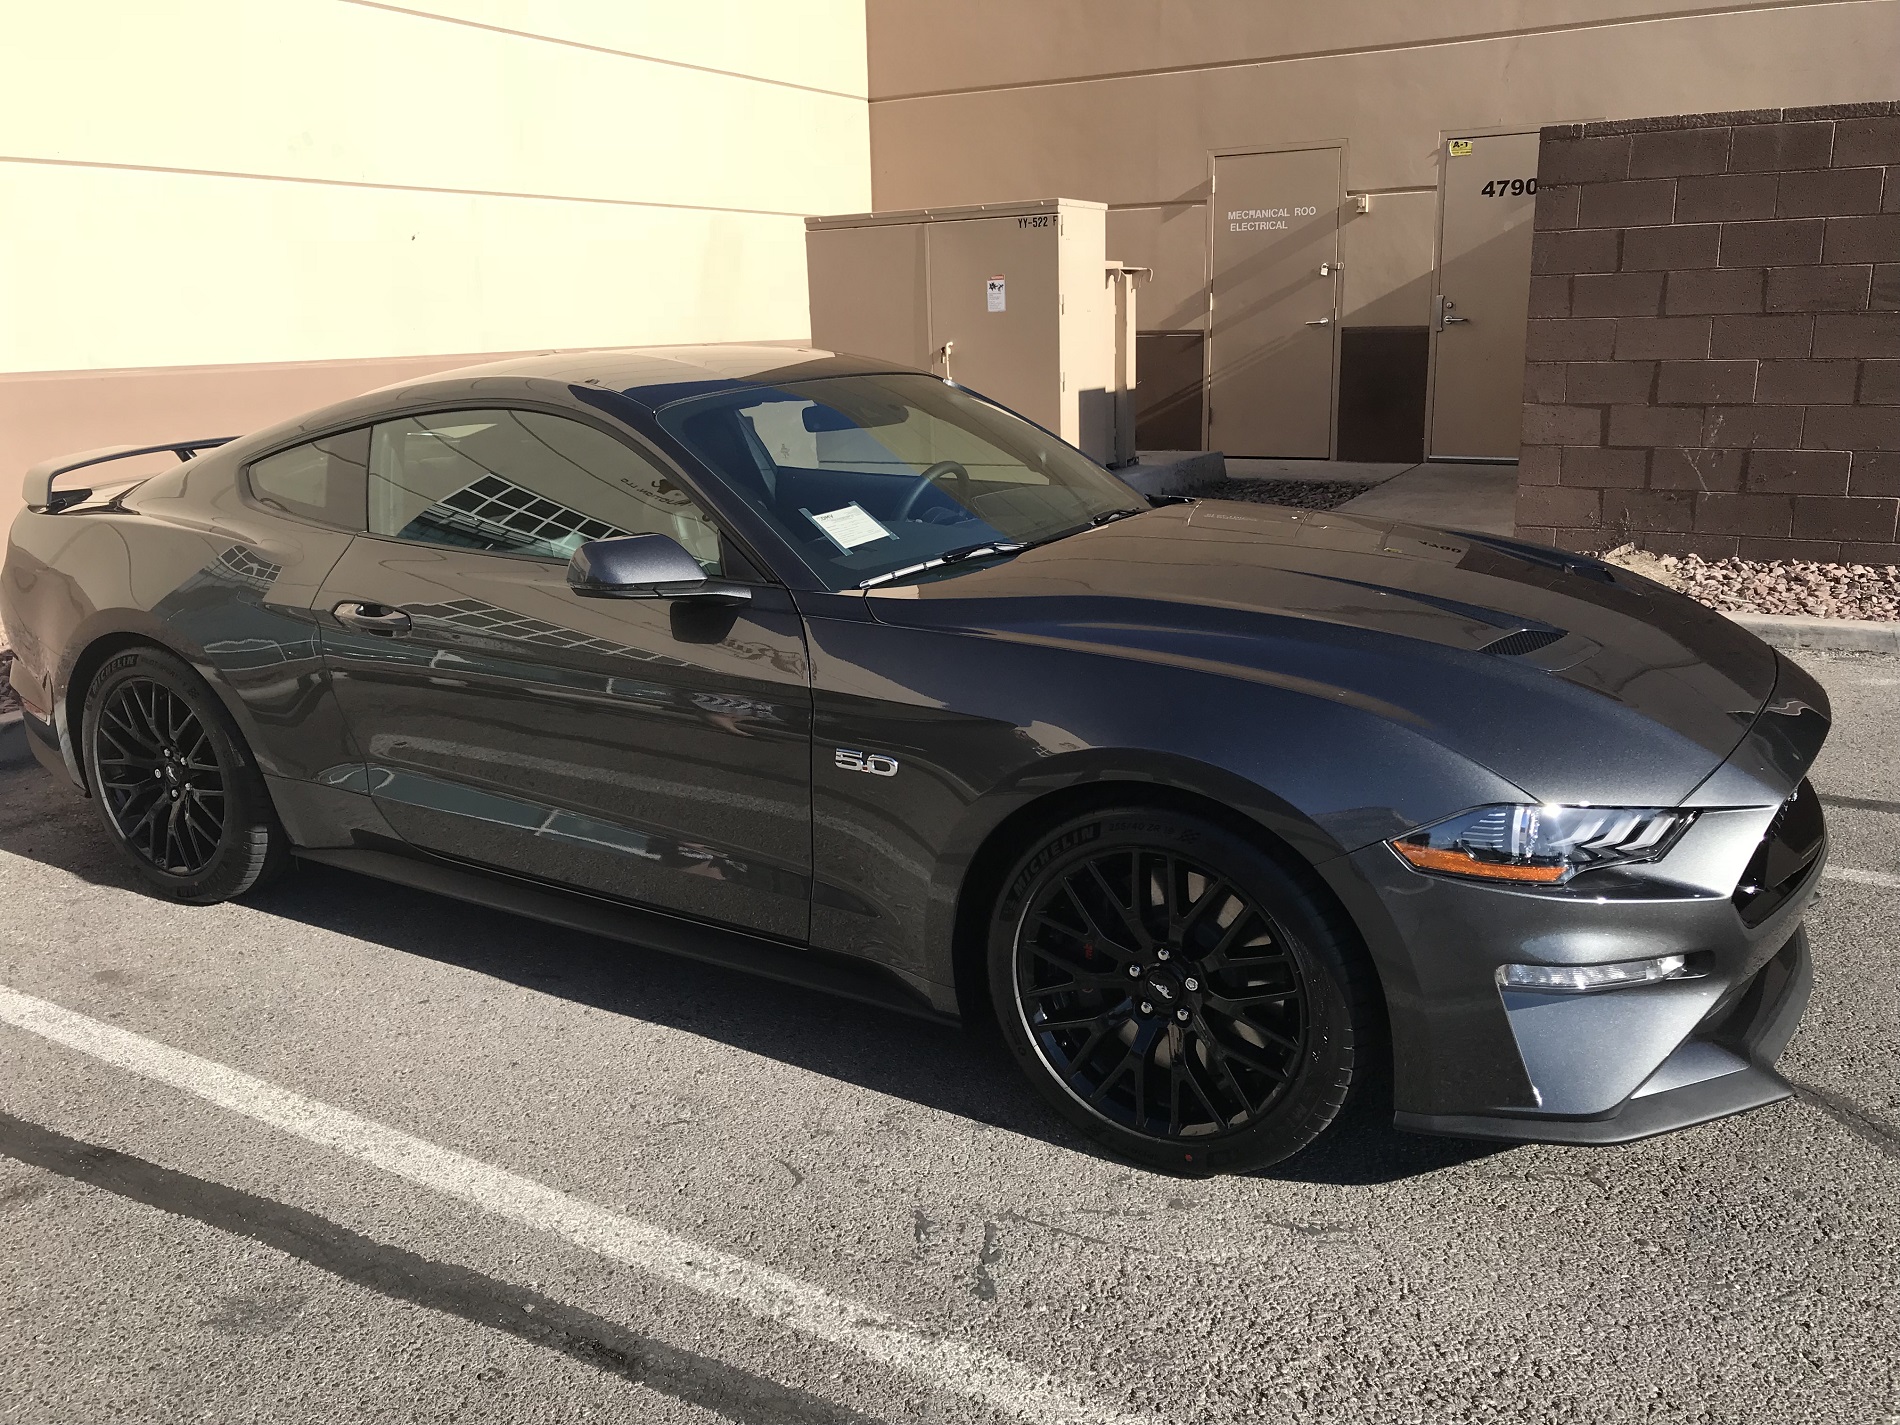 S650 Mustang Automatic COTUS Checker image1